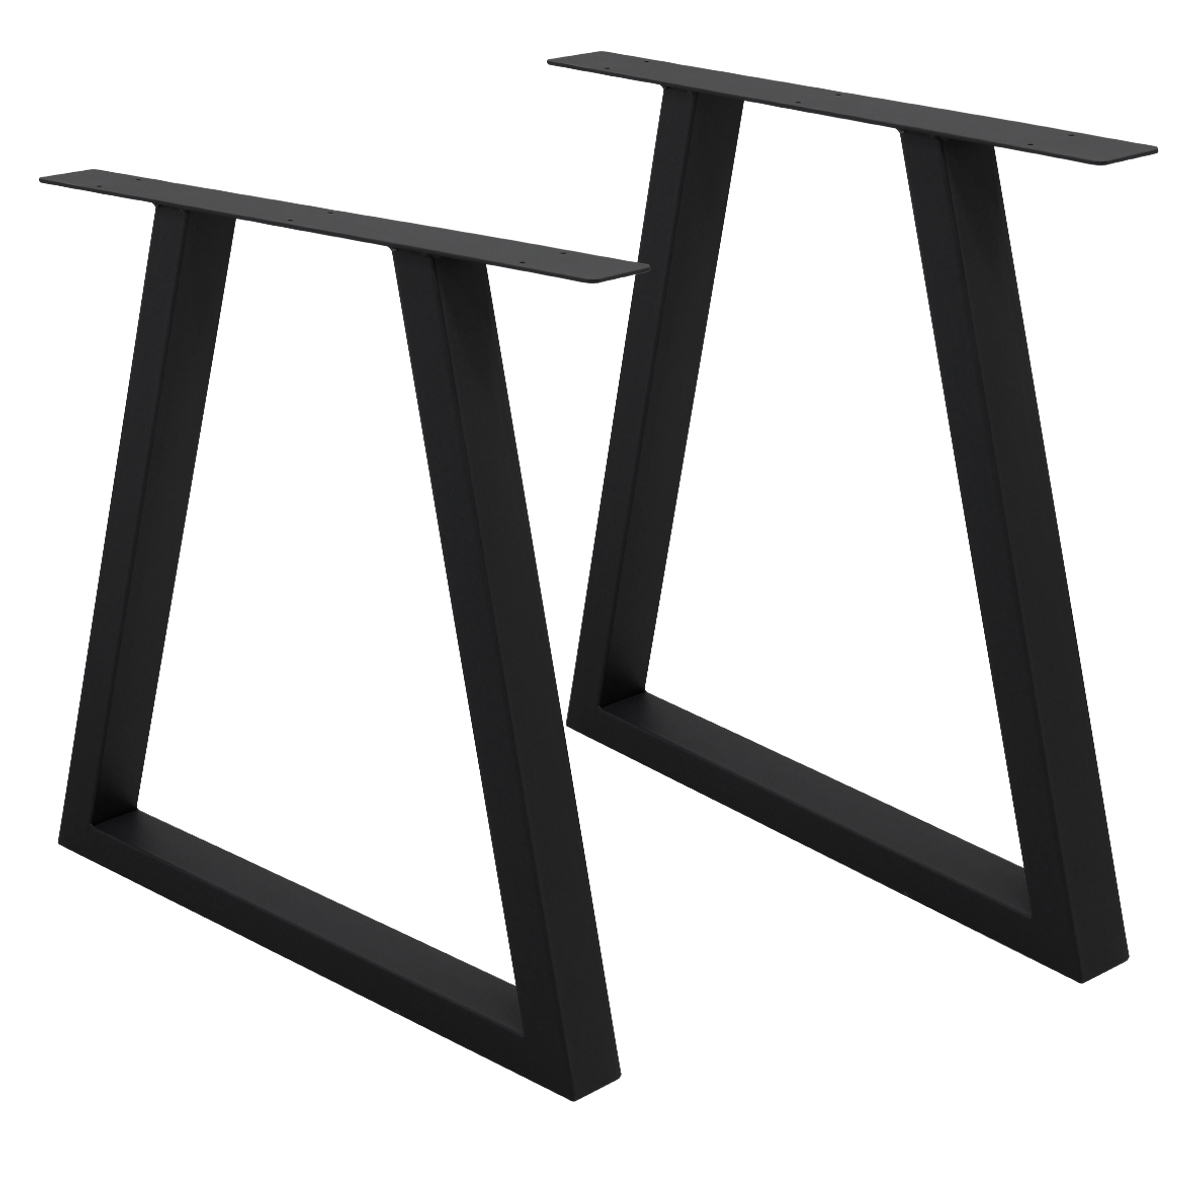 Table Frame Table Legs Metal Table Runners Black Transparent Industrial Design 